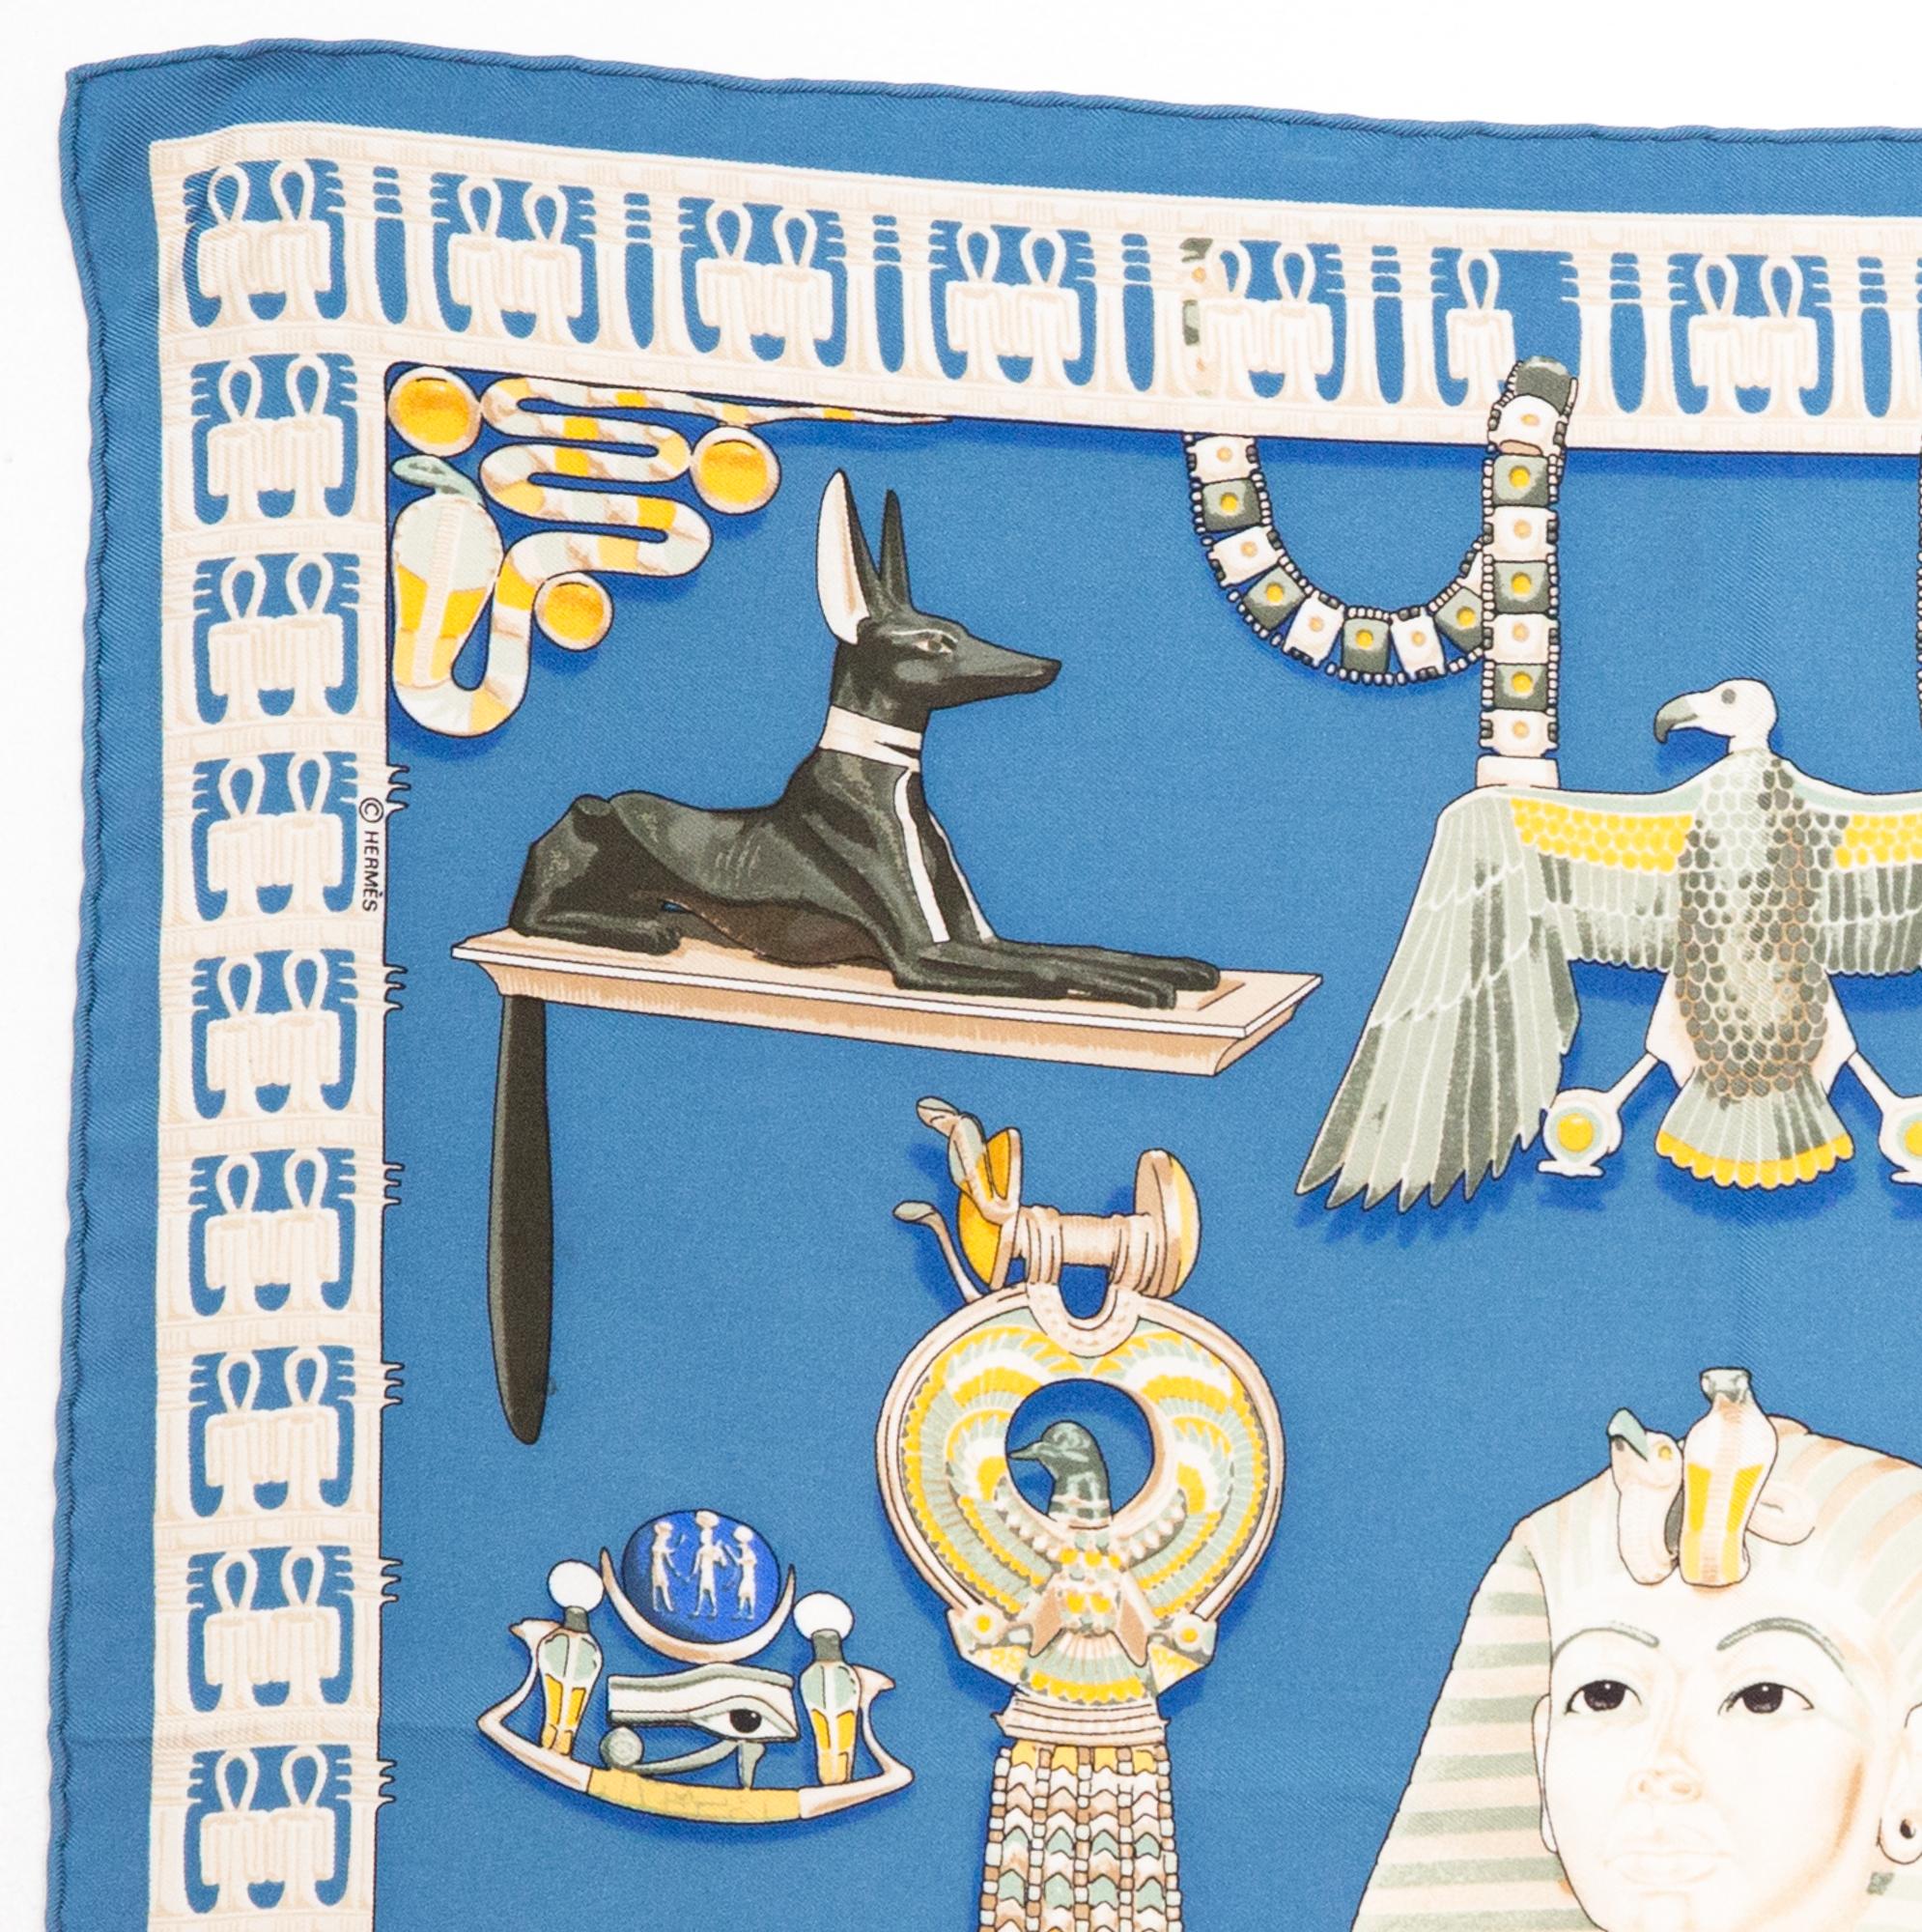 1976 Hermes gavroche silk scarf Tutankhamun by Vladimir Rybaltchenko featuring an egyptian scene and a Hermès signature. 
First edition in 1976
In good vintage condition. Made in France.
16.9in (43cm)  X 16.9in (43cm)
We guarantee you will receive